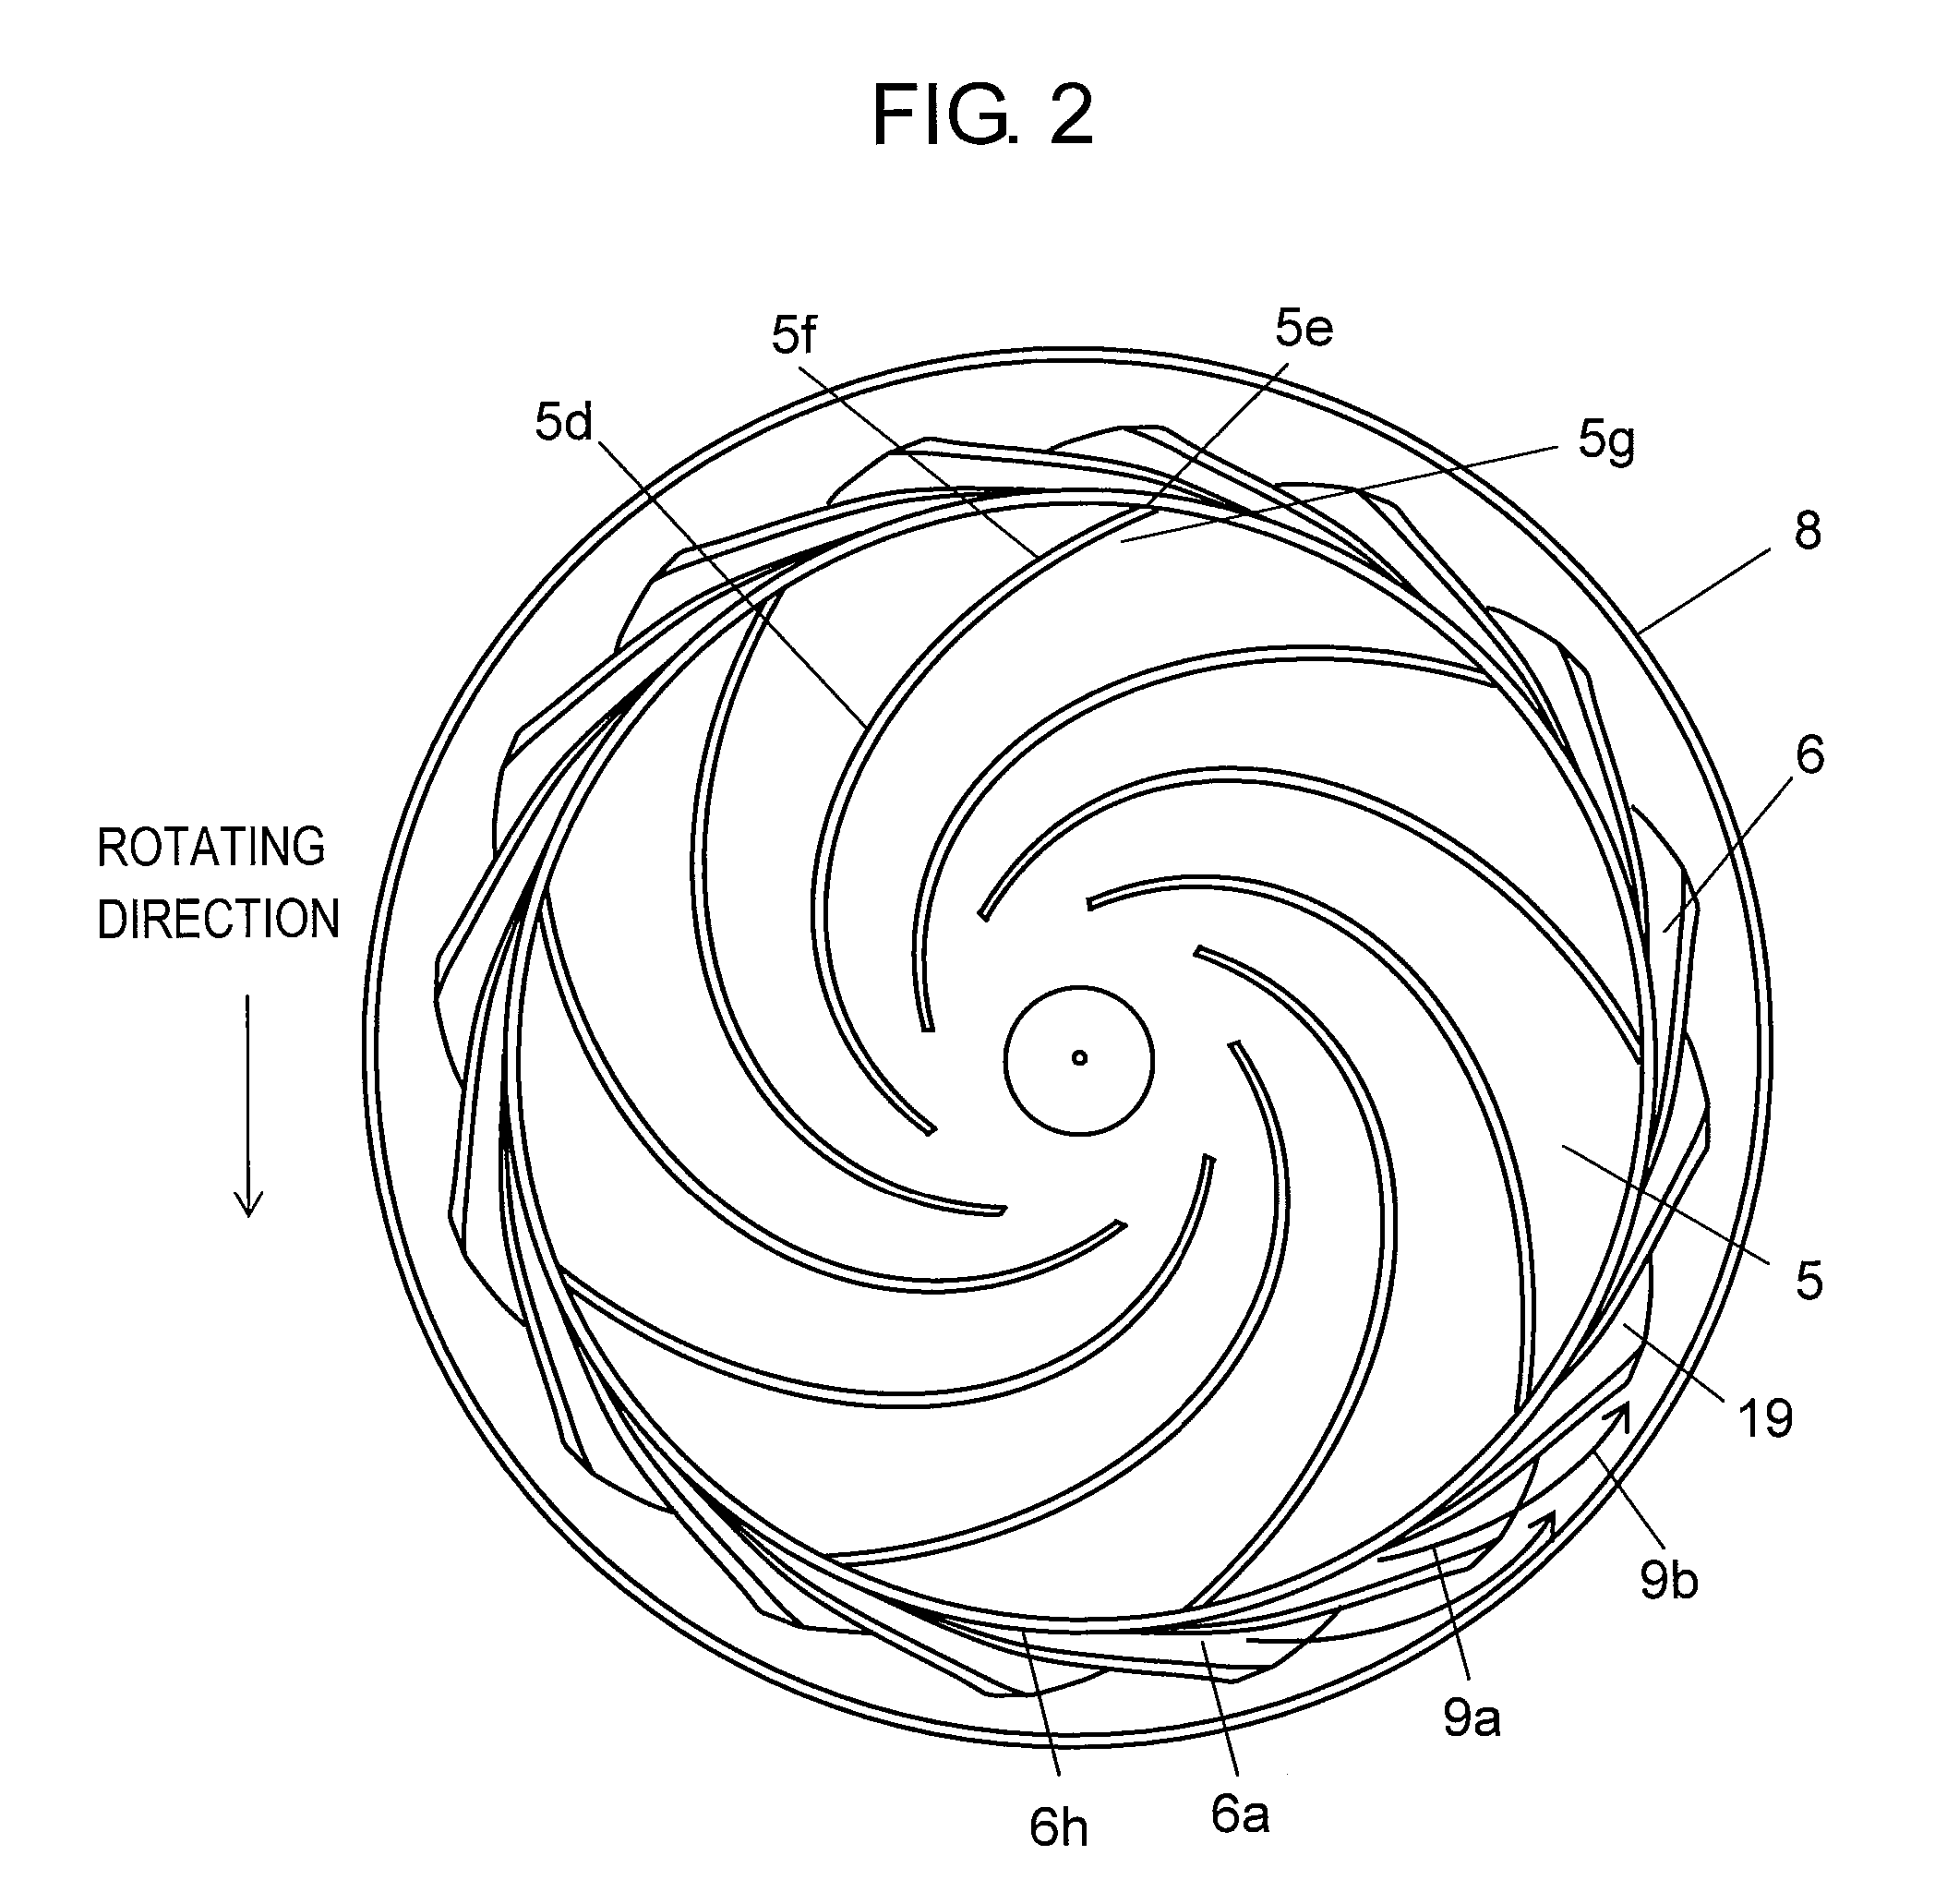 Electric blower and vacuum cleaner comprising same